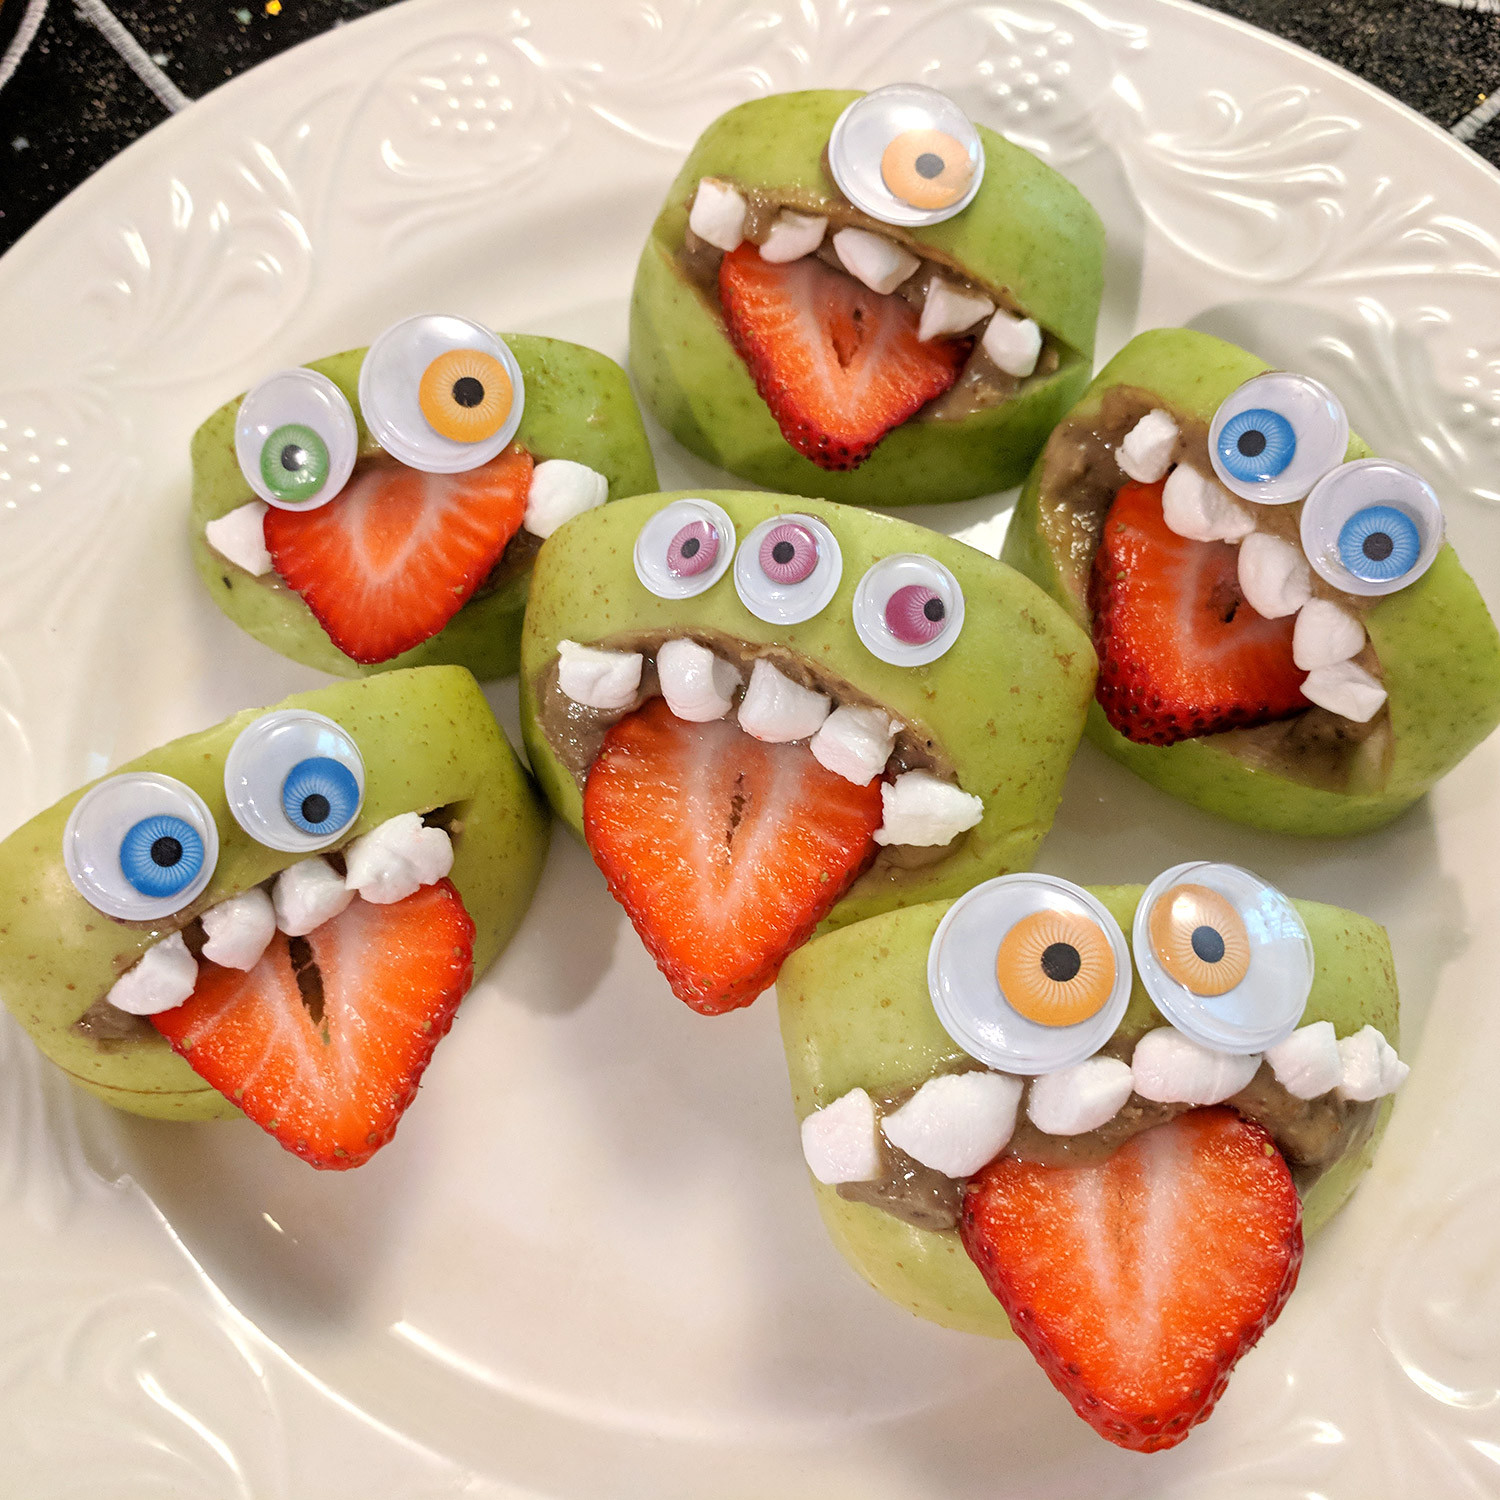 Halloween Desserts For Kids
 Healthy Halloween Treats and Spooky Party Ideas Kid